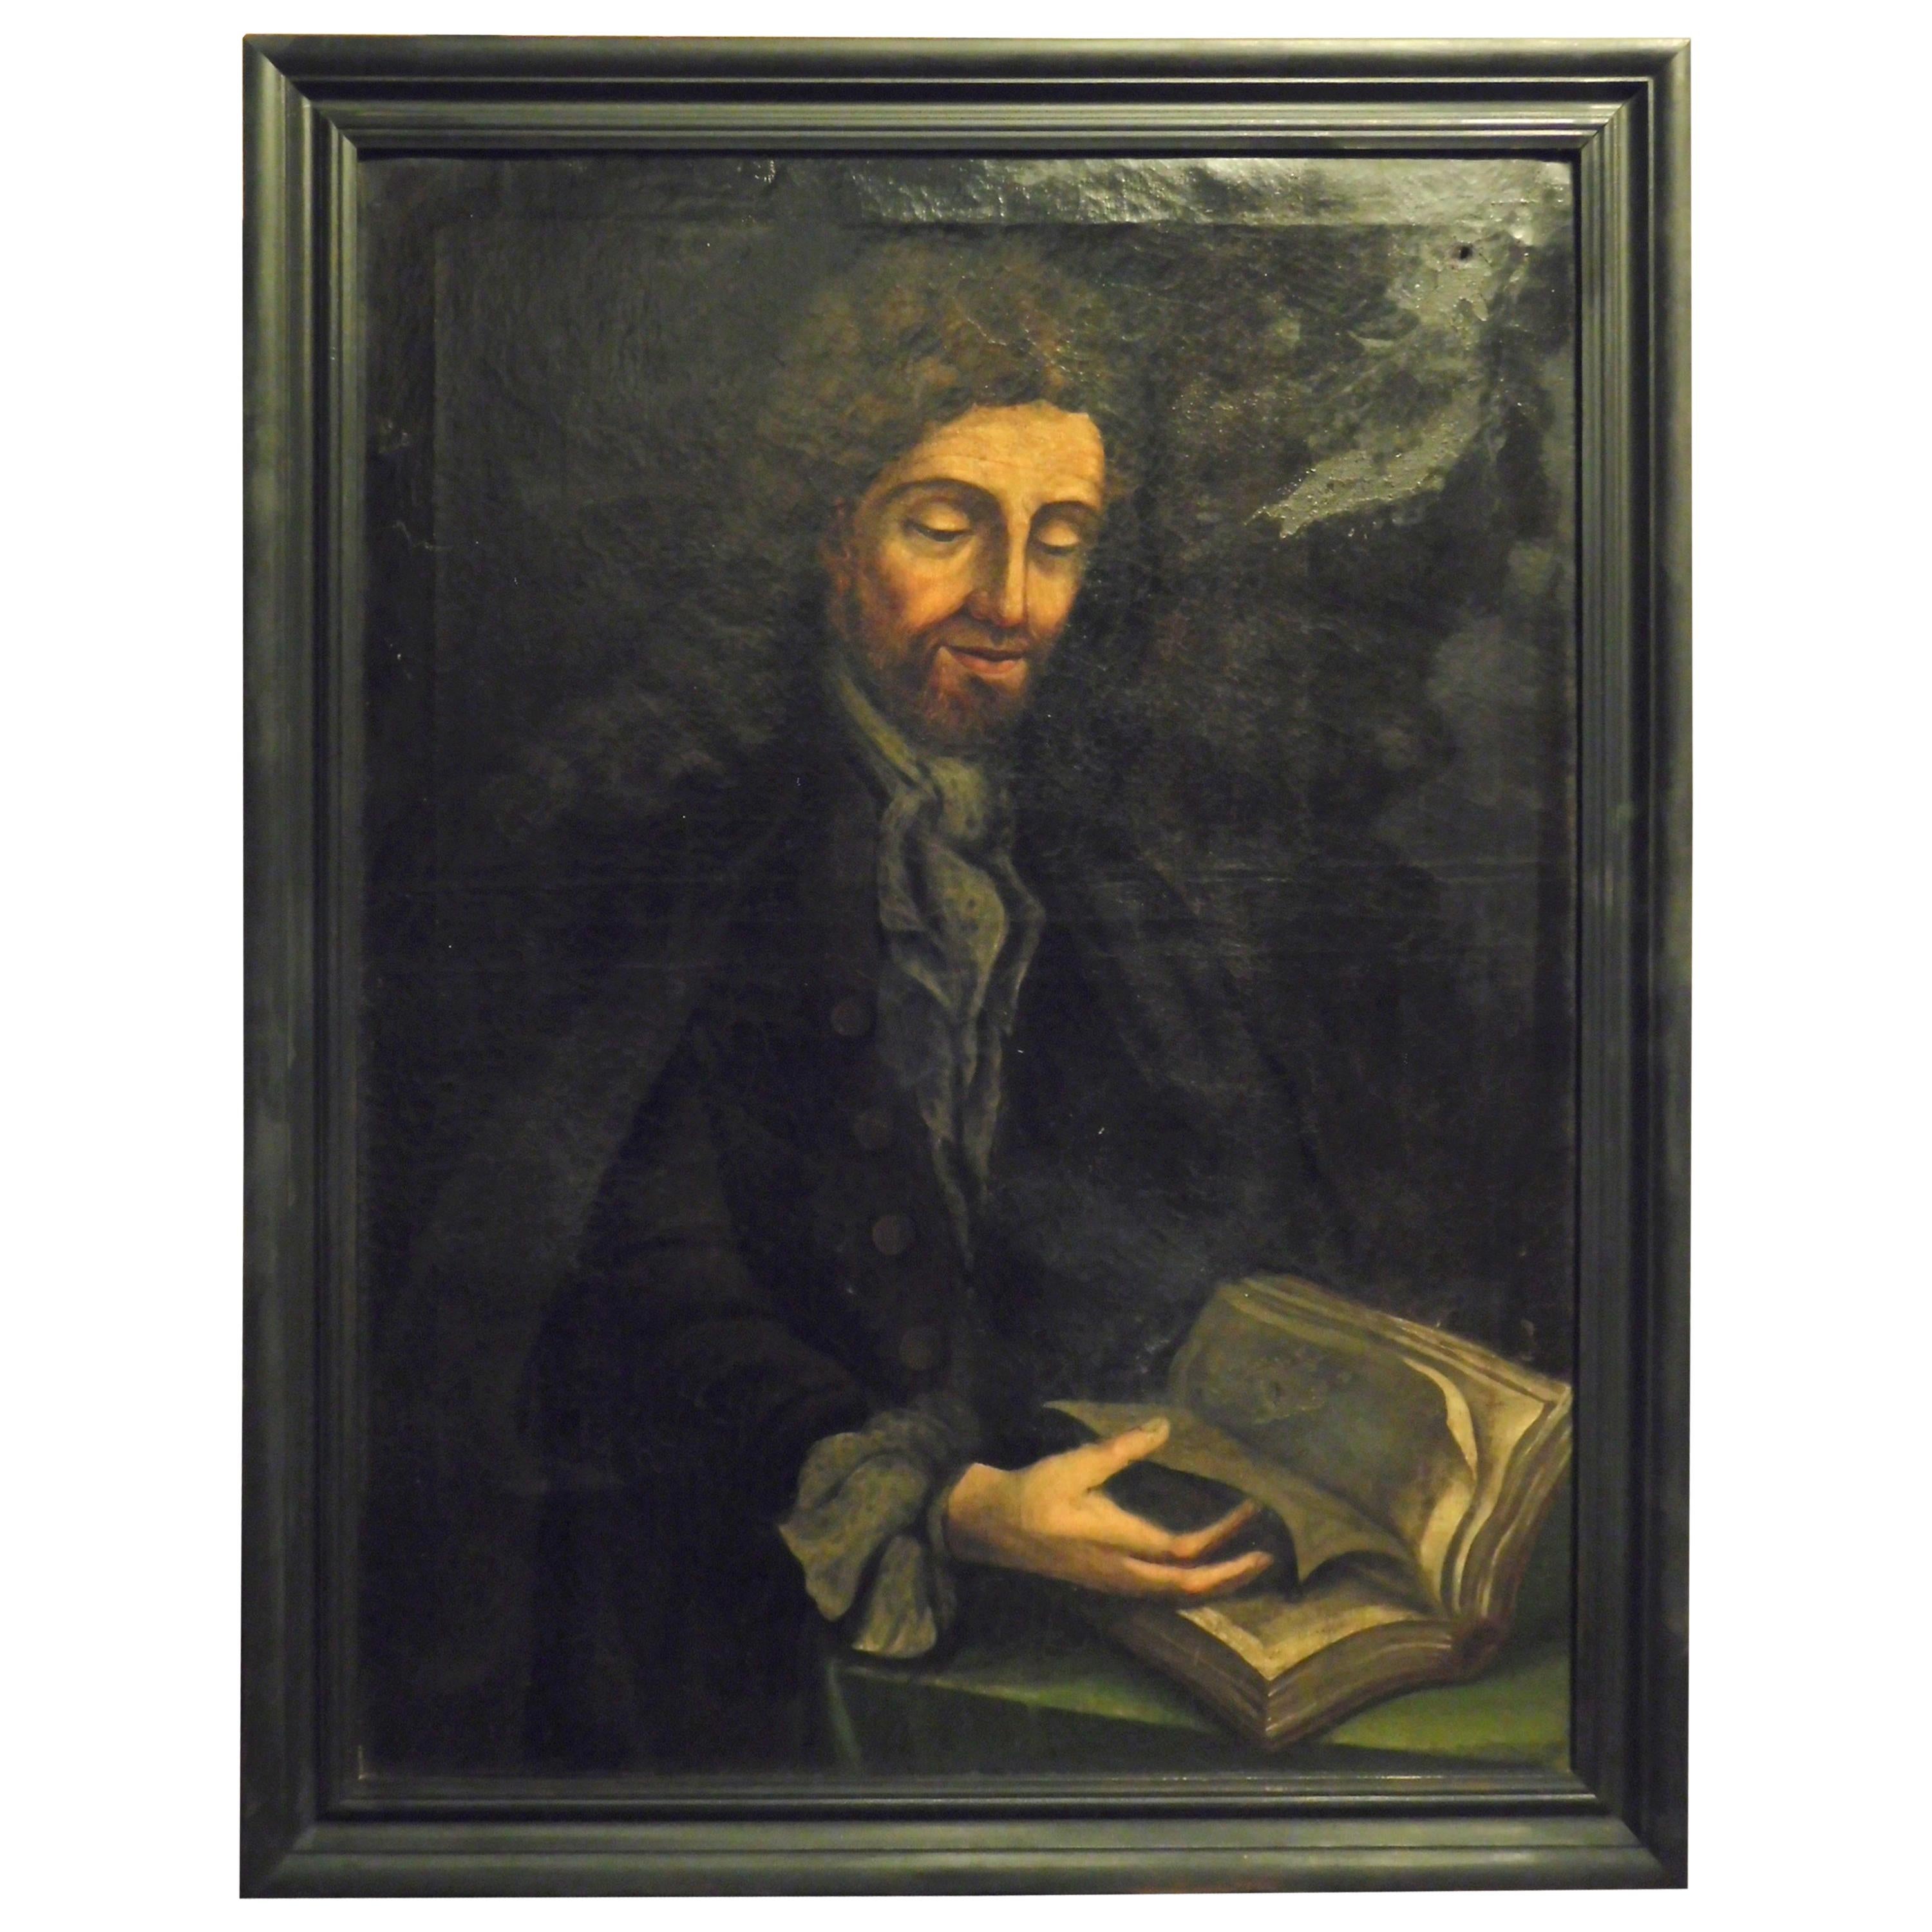 Antique Oil Painting on Canvas, Character "tutor", Black Frame, 1700, Italy